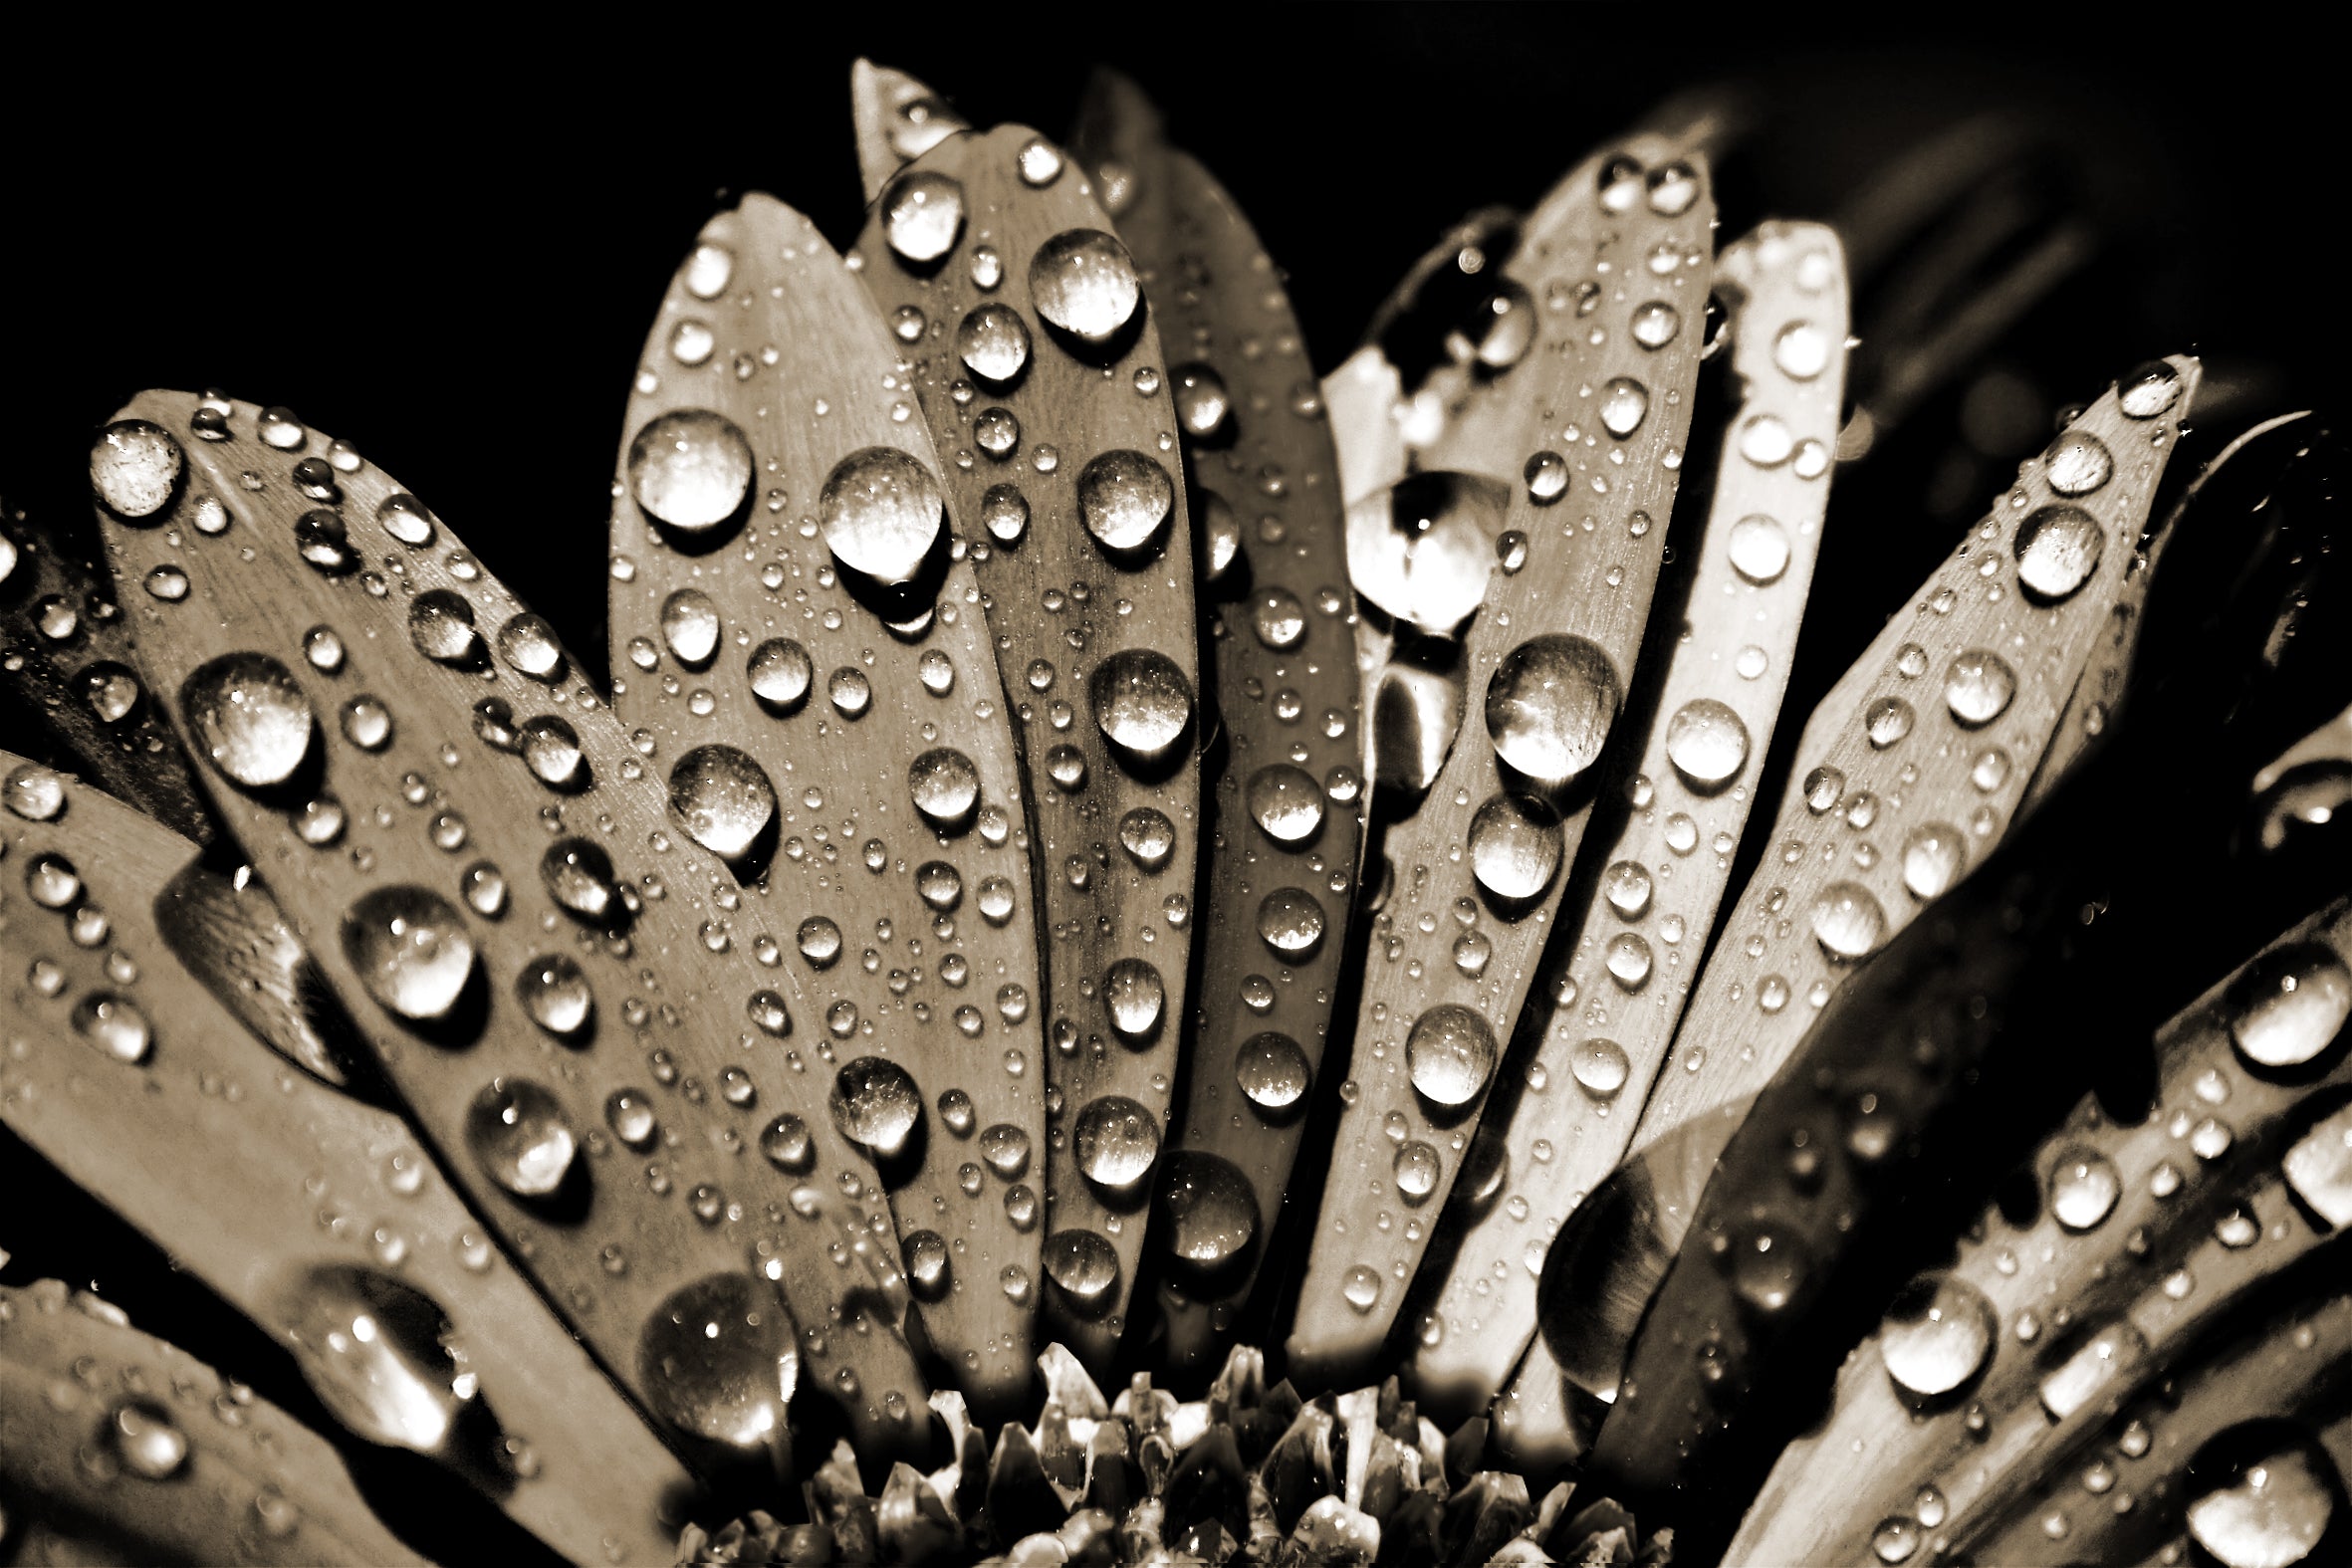 Close-up photo of flower petals with water droplets in sepia